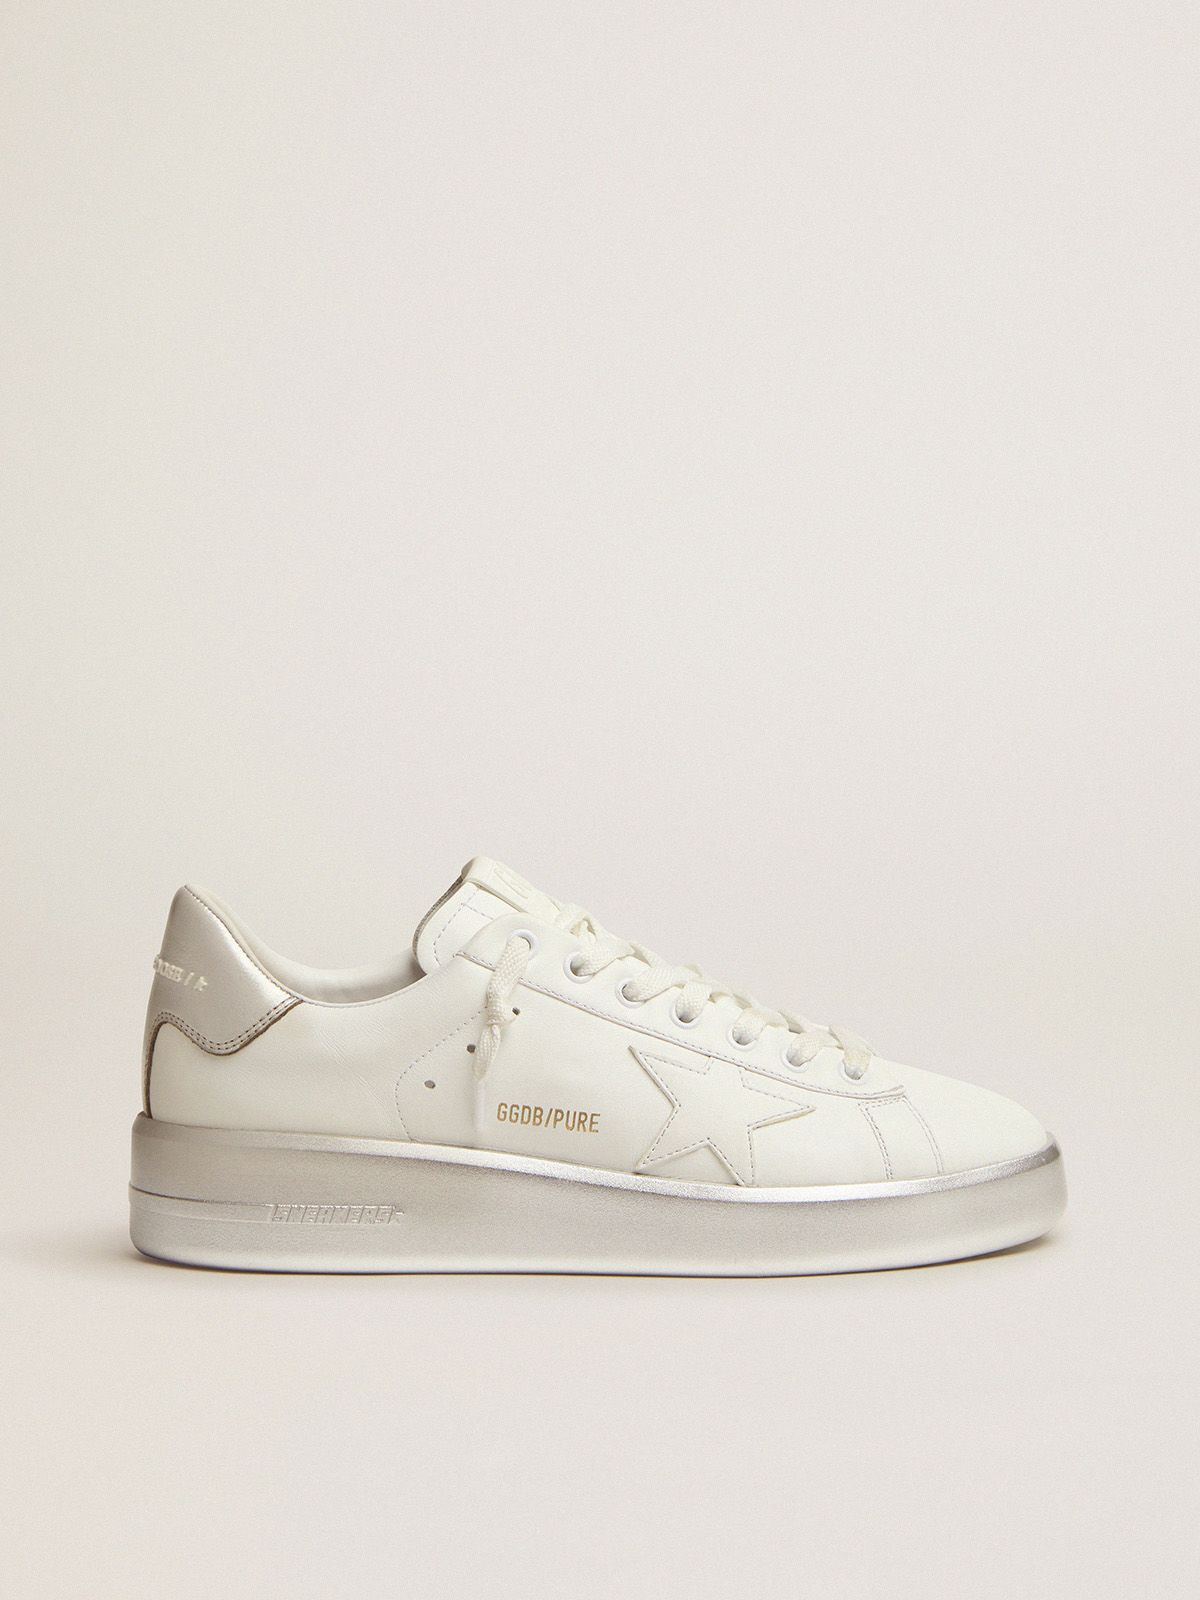 Purestar sneakers in white leather with silver laminated heel tab and foxing